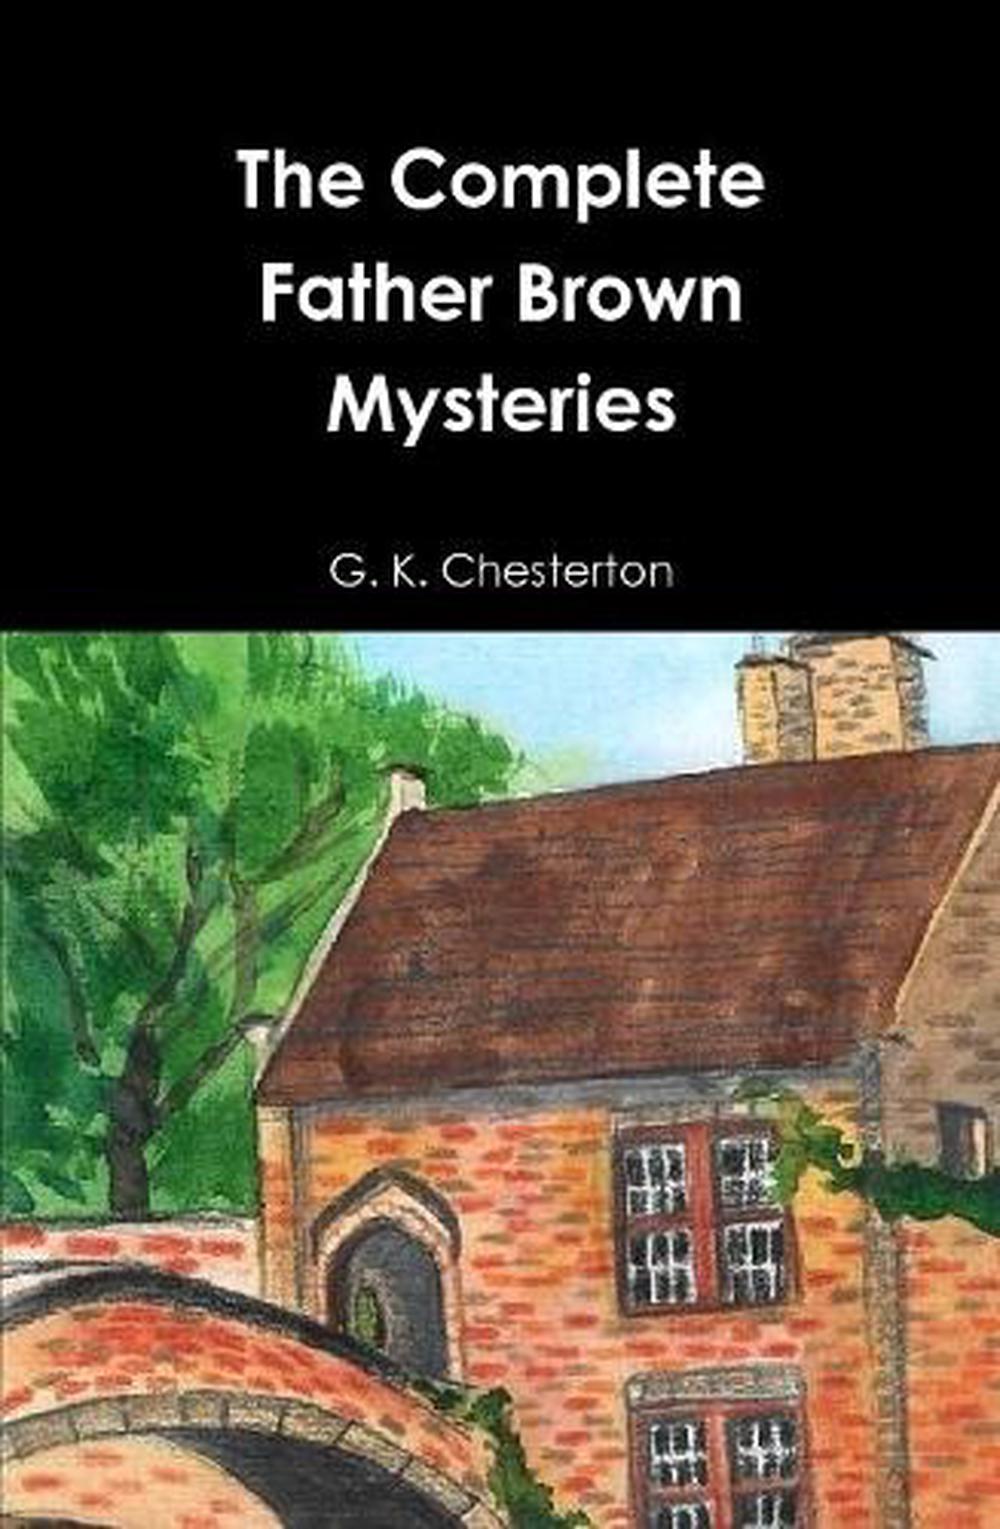 The Complete Father Brown by G.K. Chesterton